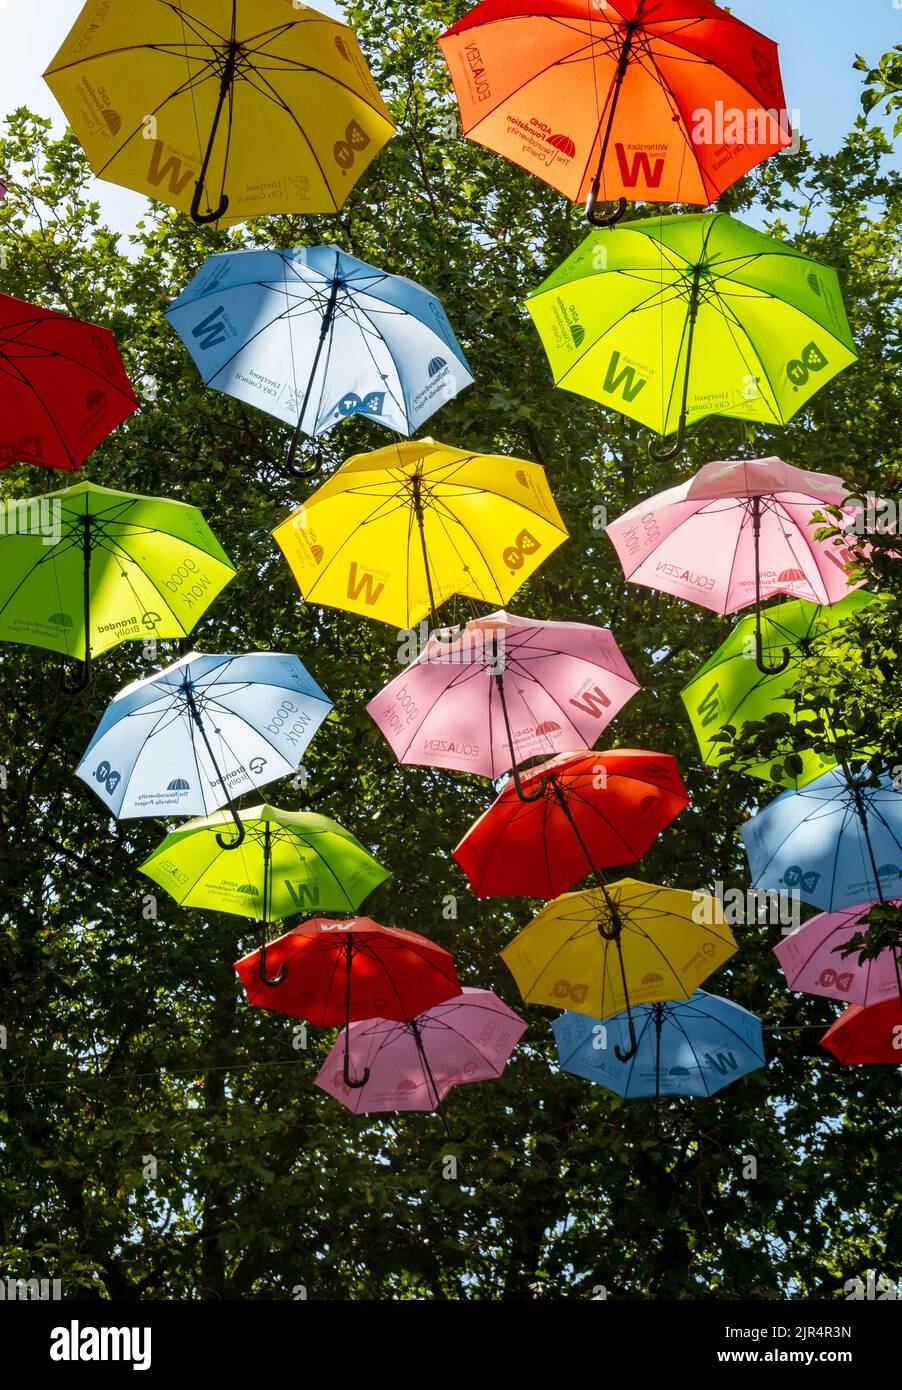 The Umbrella Project on Church Alley, Liverpool Stock Photo